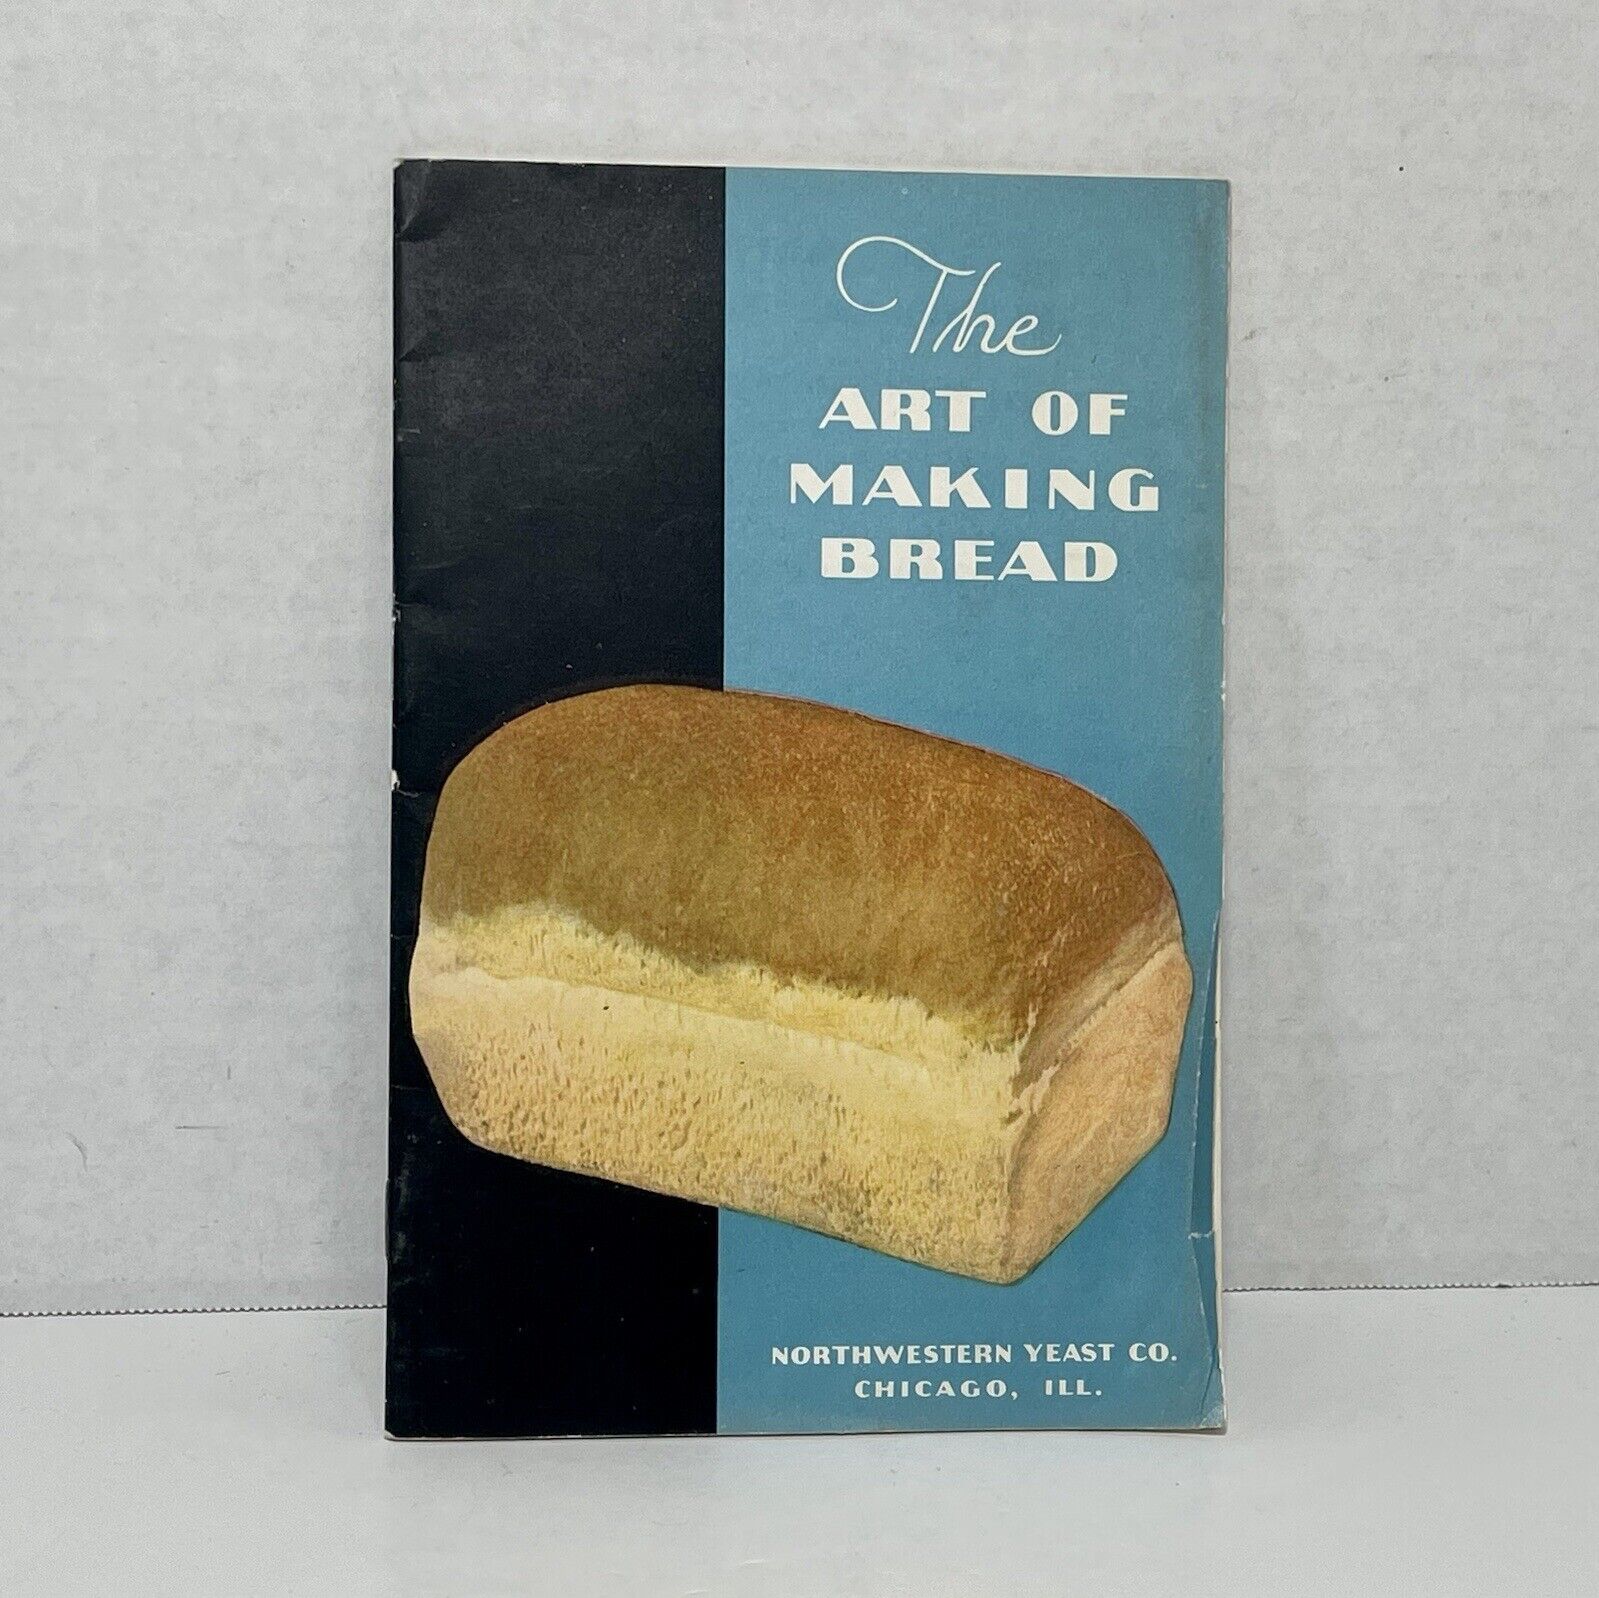 1935 Northwest Yeast Co Art of Making Bread Vintage Recipes Booklet - 29 pages